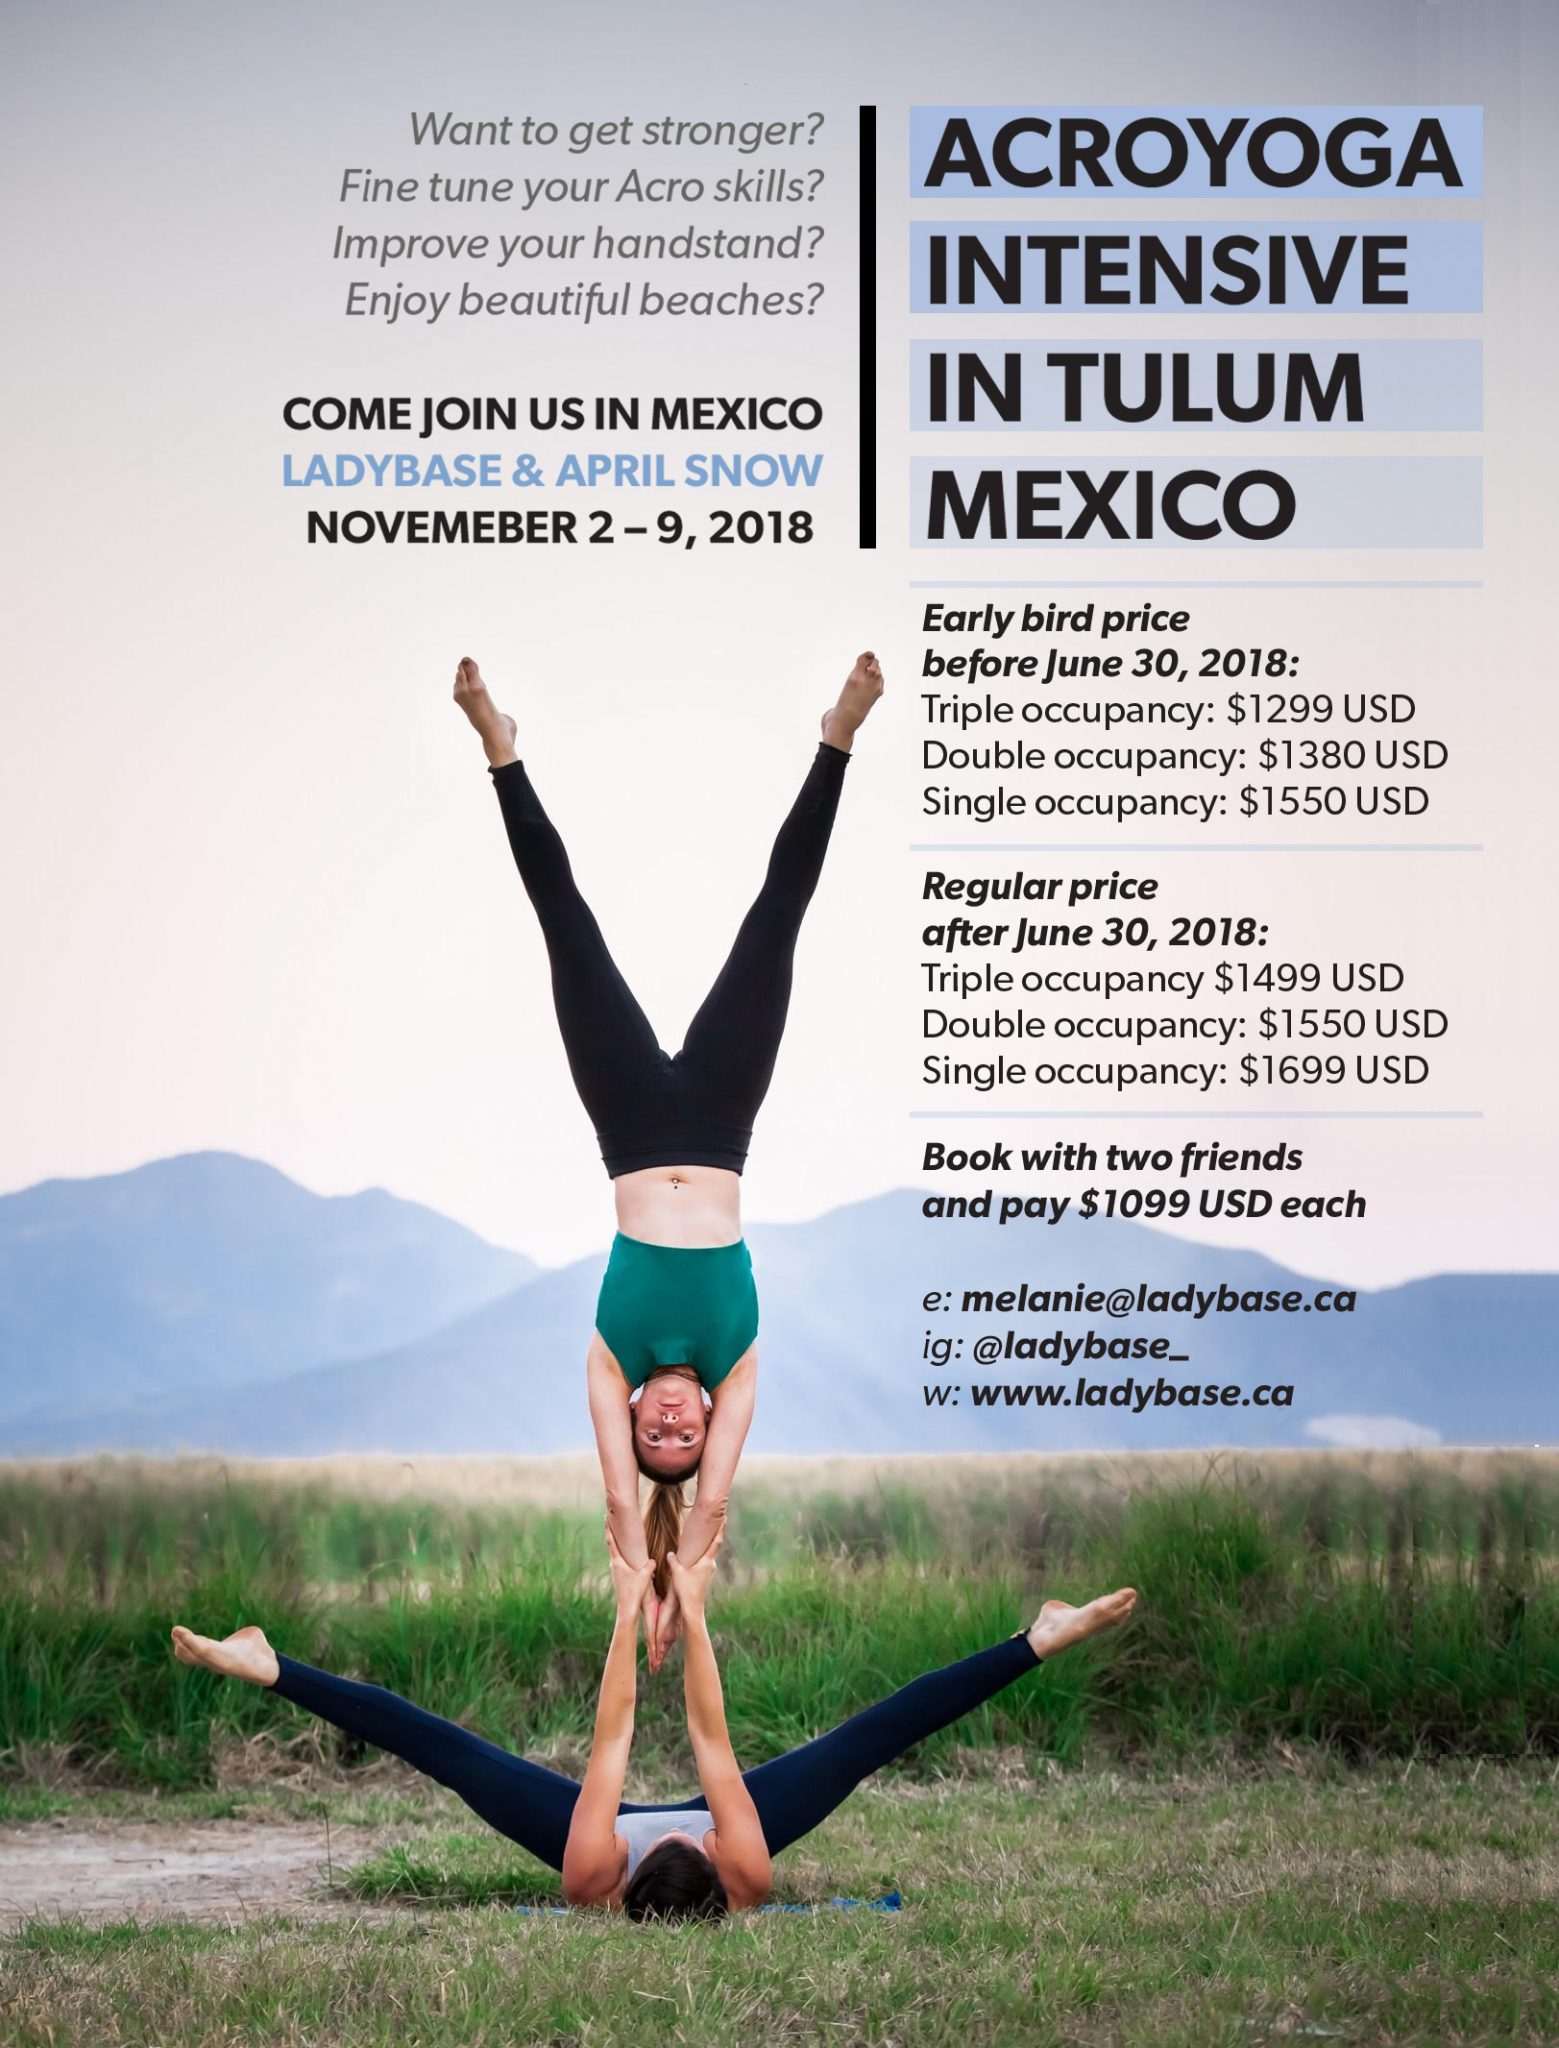 Acroyoga Intensive in Tulum with Ladybase and April Snow – Acropedia